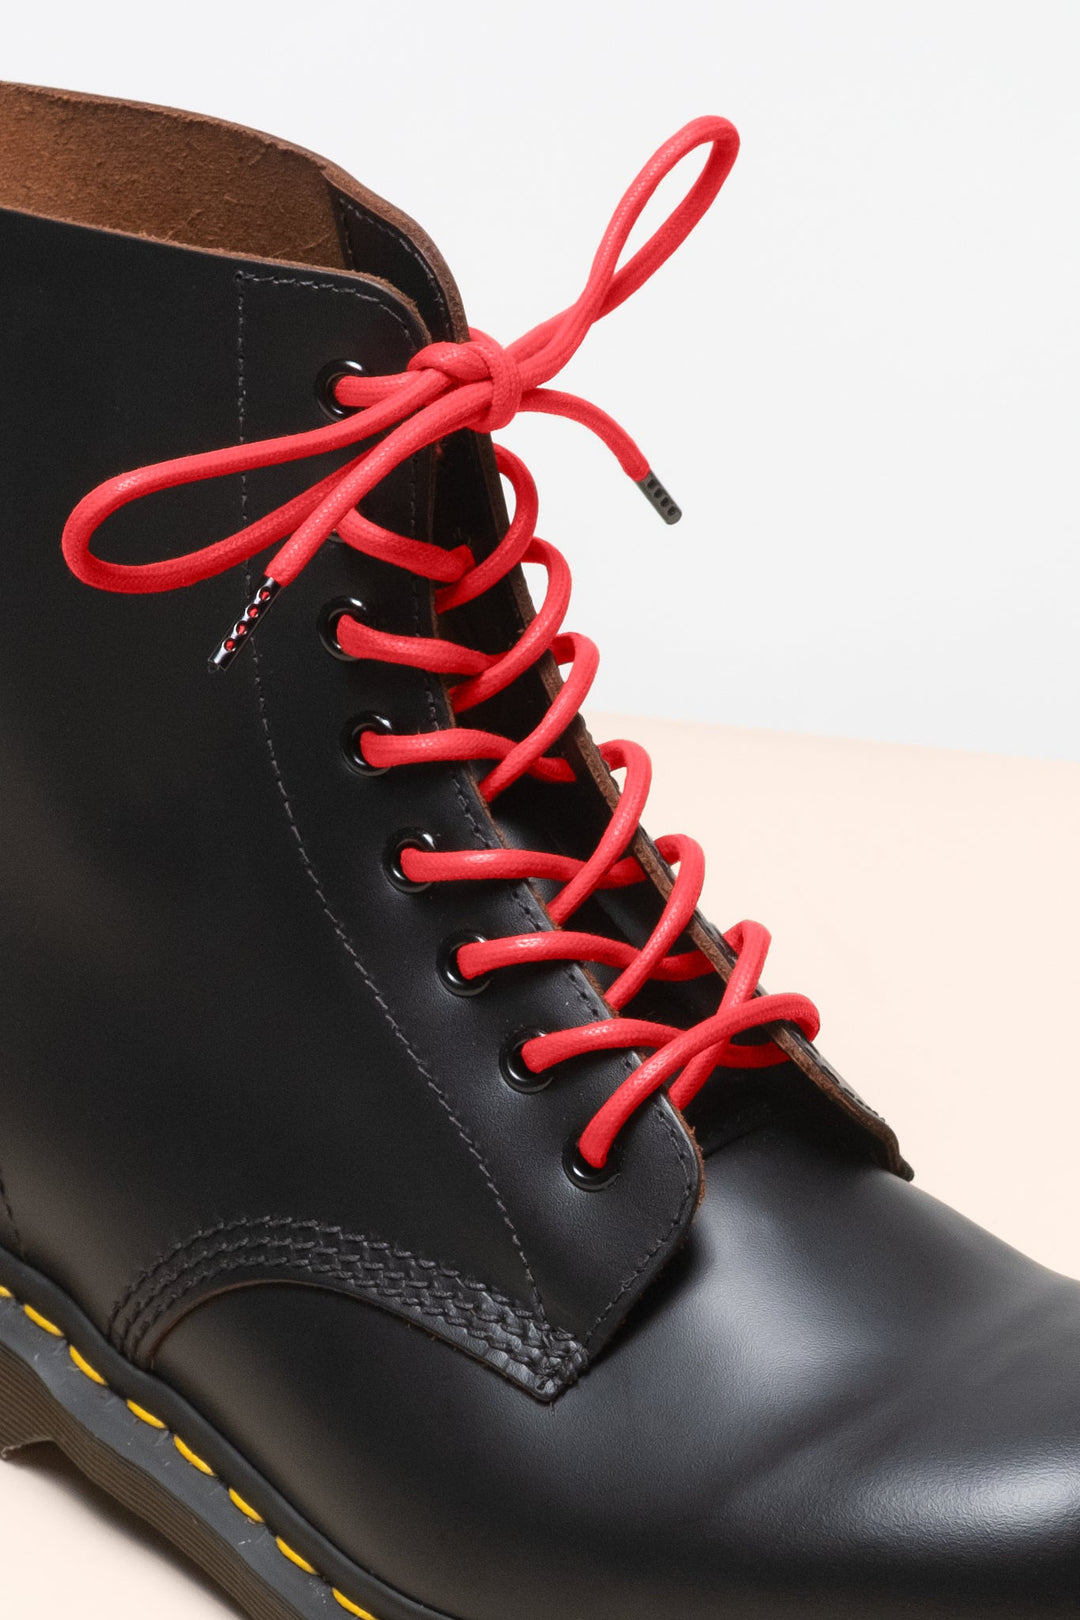 Testarossa - 4mm round waxed shoelaces for boots and shoes made from 100% organic cotton - Senkels